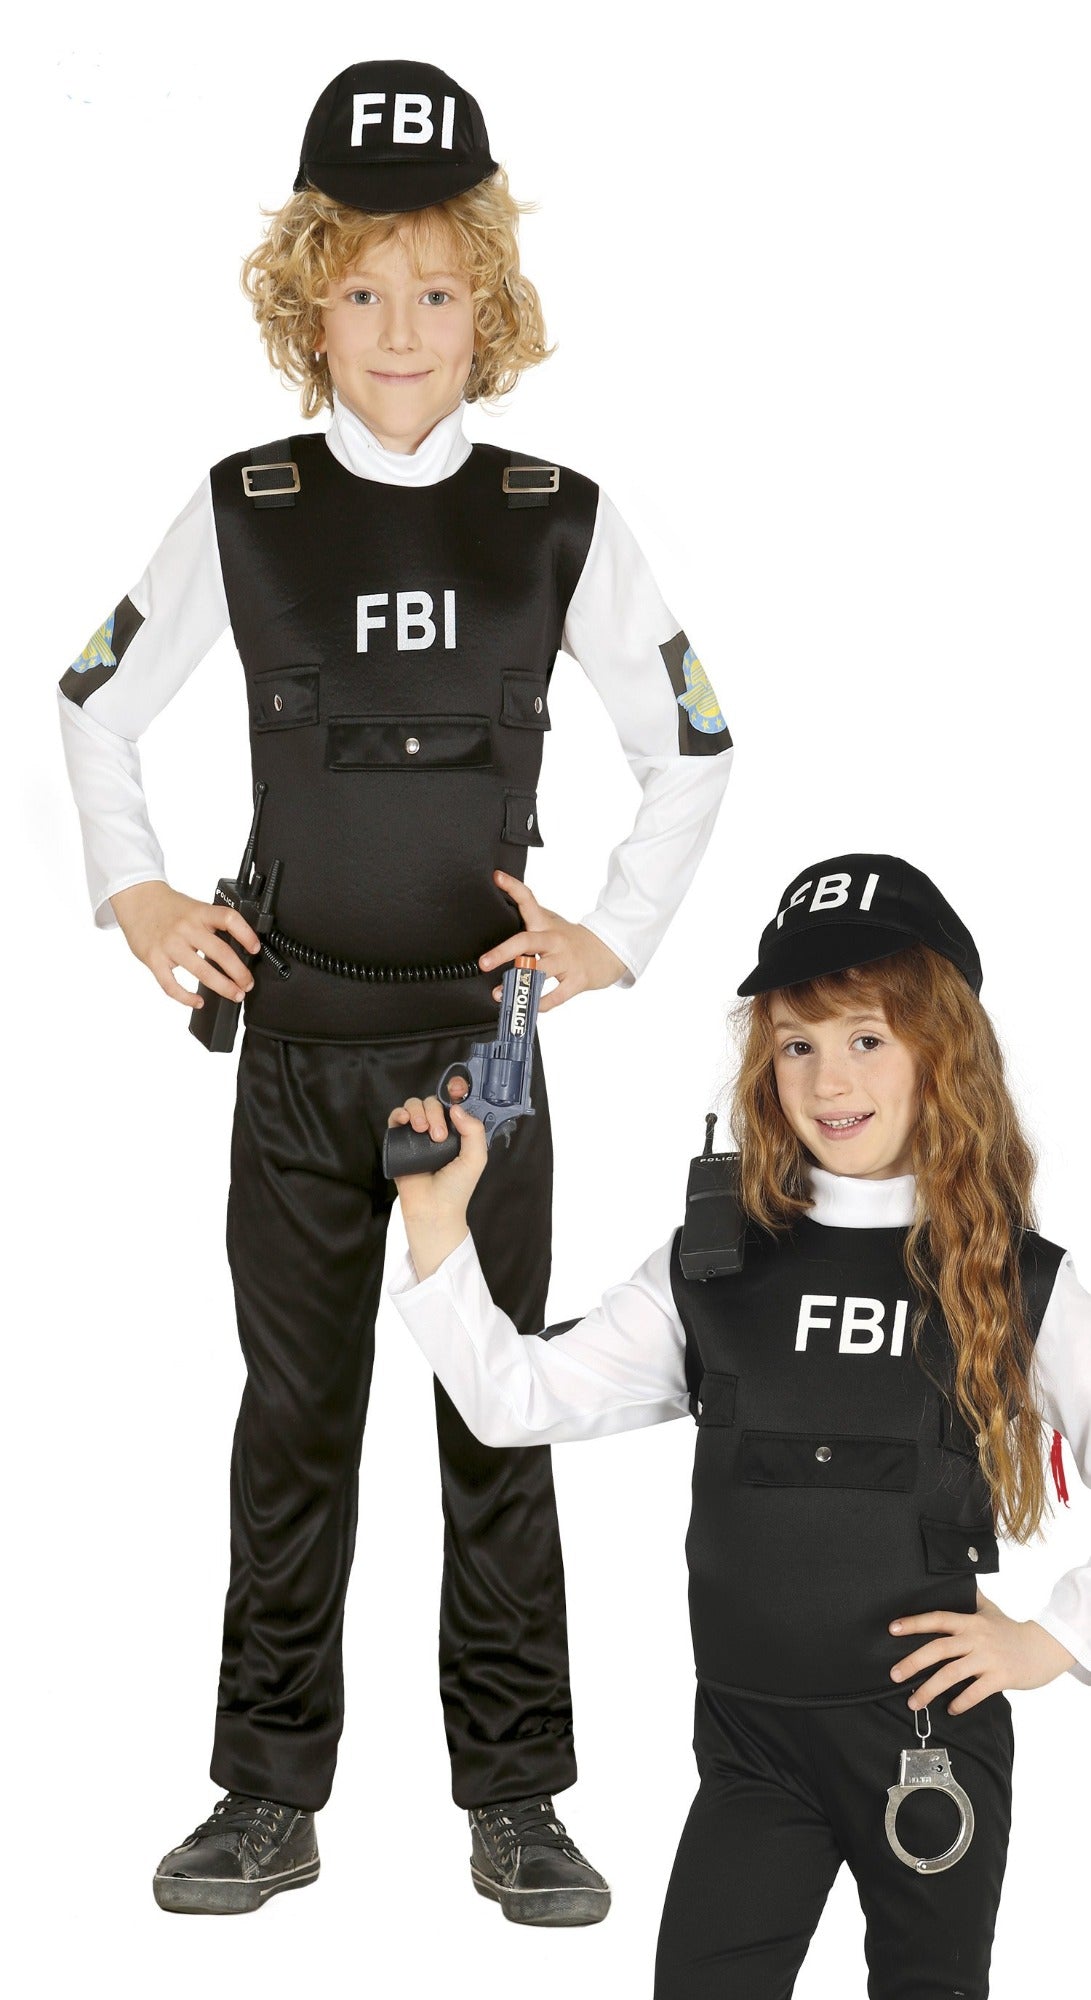 Child Kids SWAT FBI Agent Police Cop Officer Fancy Dress Costume Outfit New